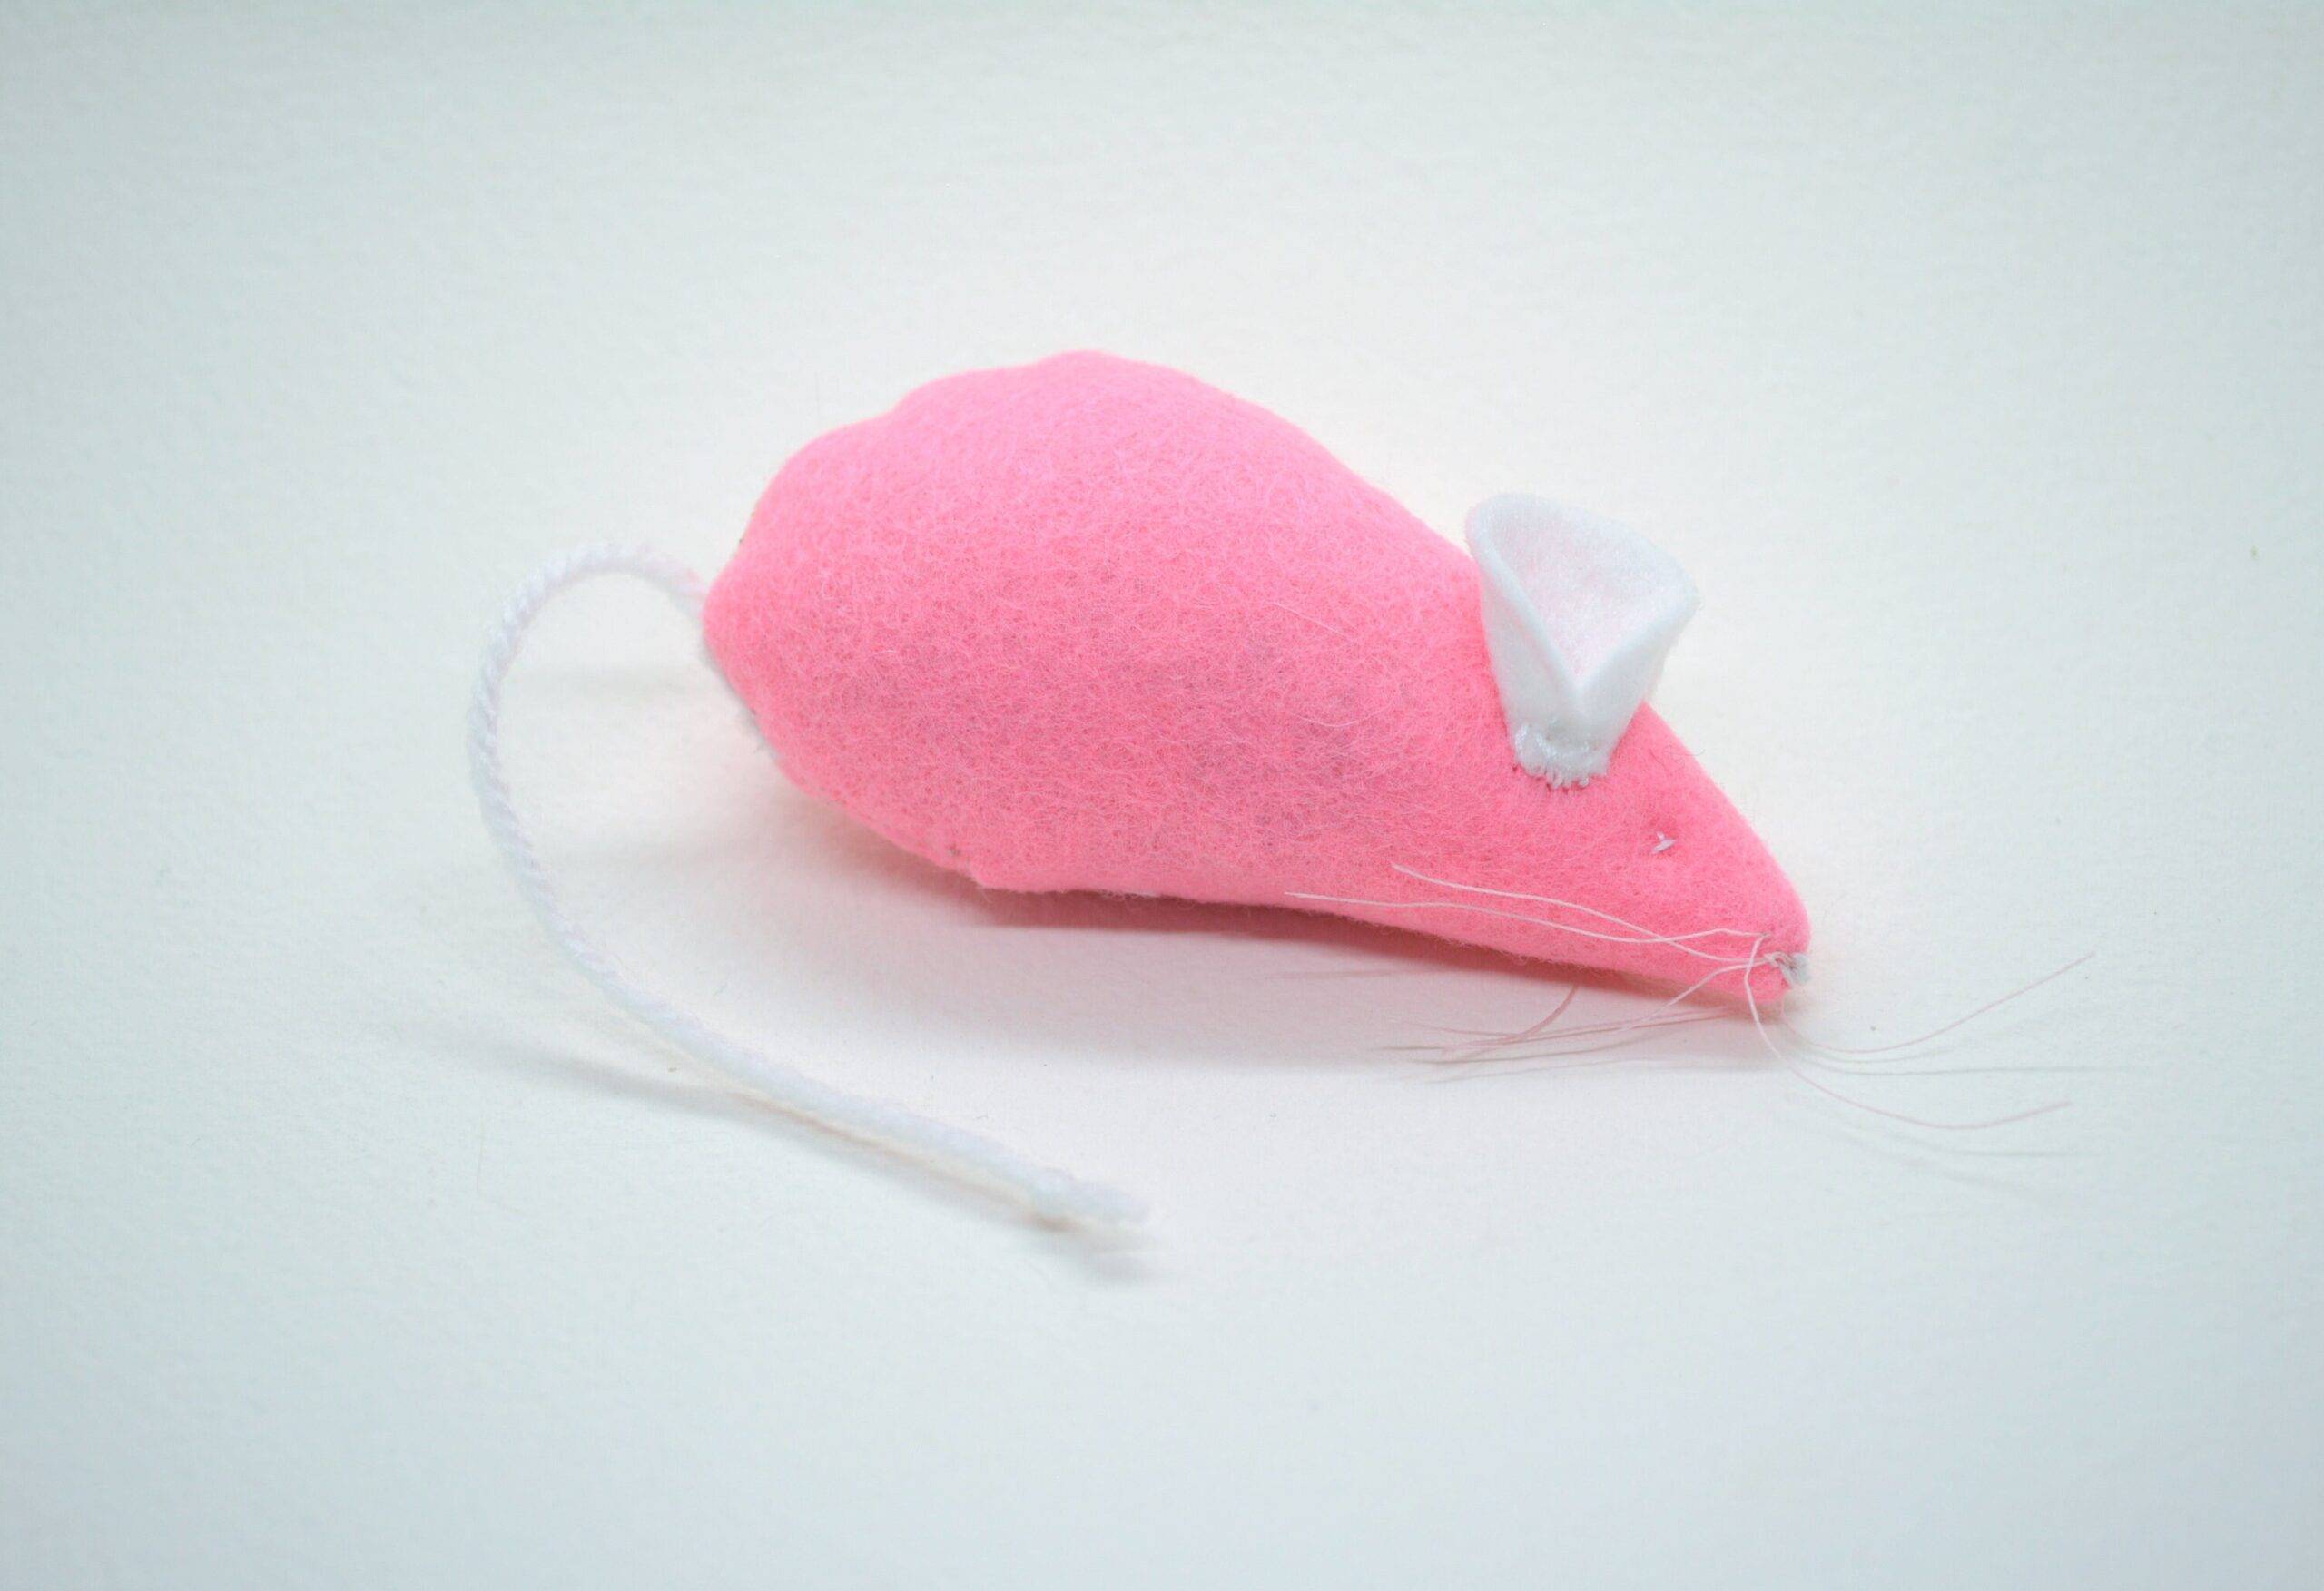 Christmas toys for cats – Catnip Toy Mini Mouse, kitten toy, pink, cute unique catnip toys, Valentine’s day cat toy, gift for cat